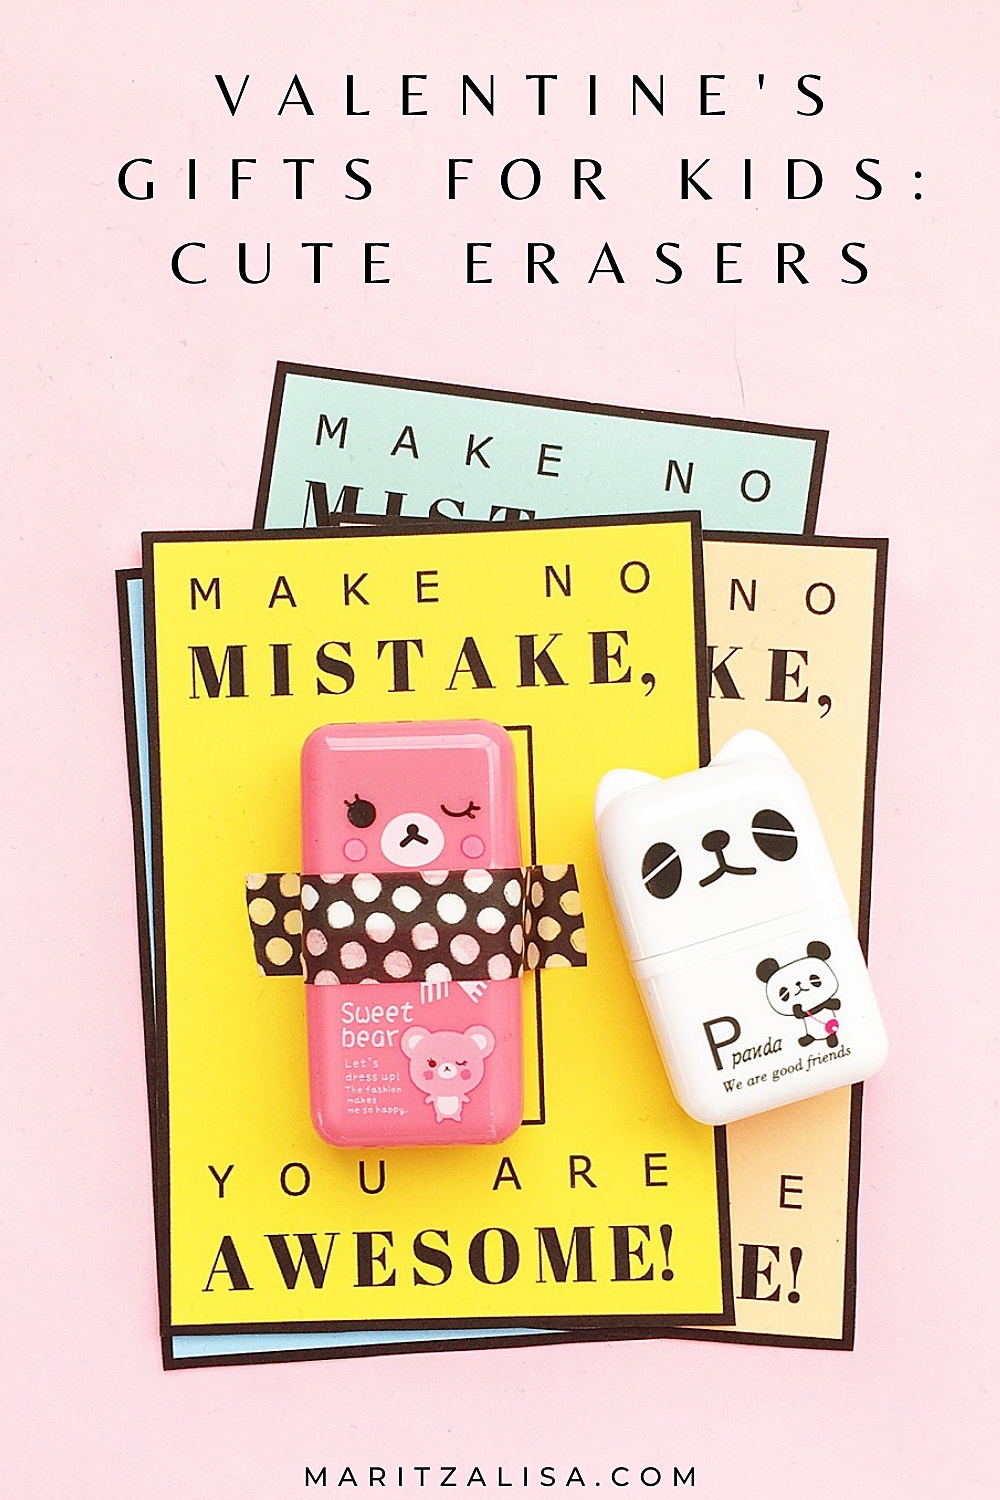 Valentine Gifts For Kids - Cute Erasers